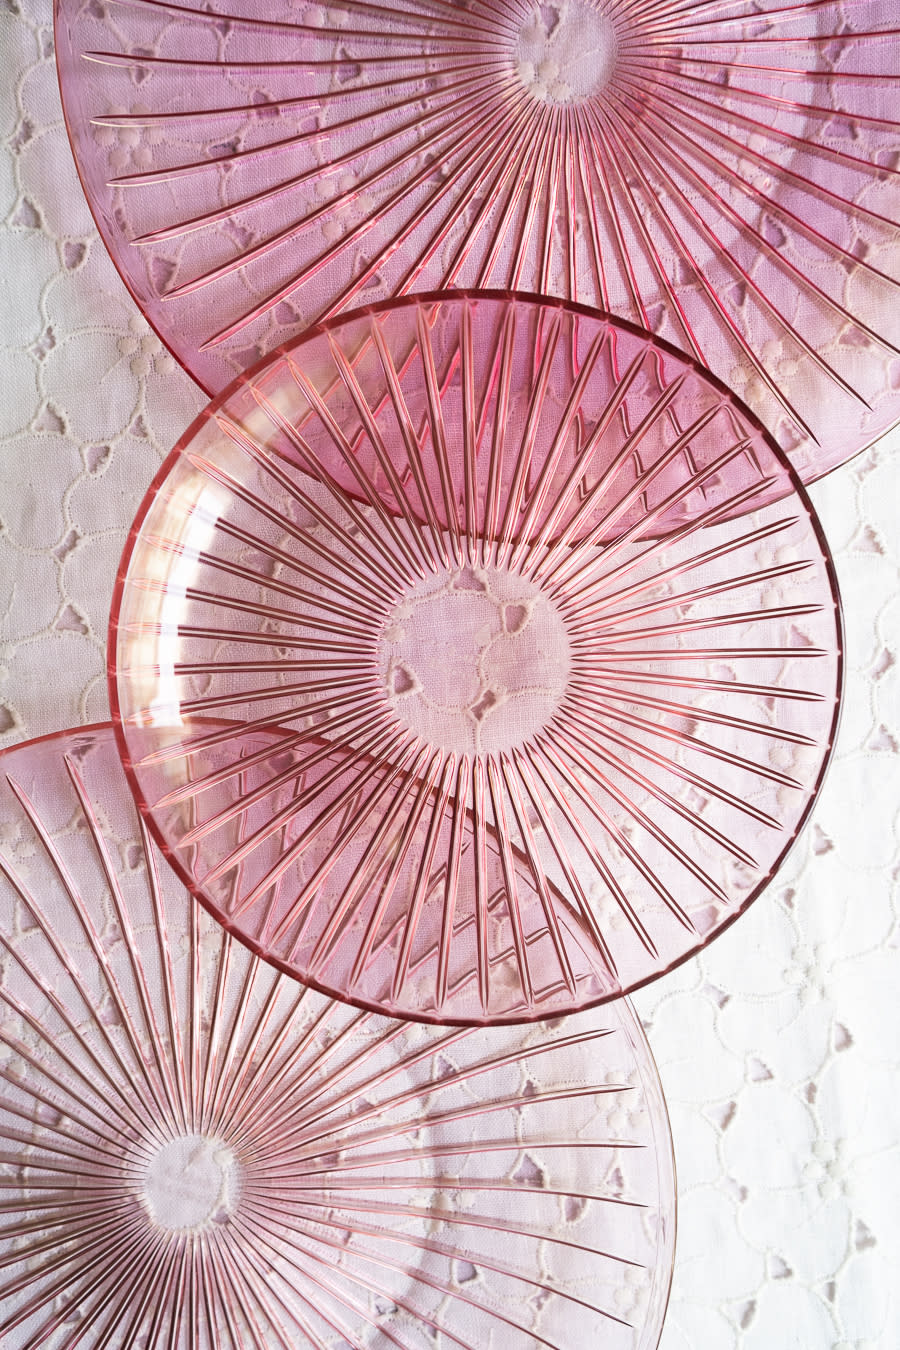 Glass dishes in the Luisa Beccaria homeware collection.